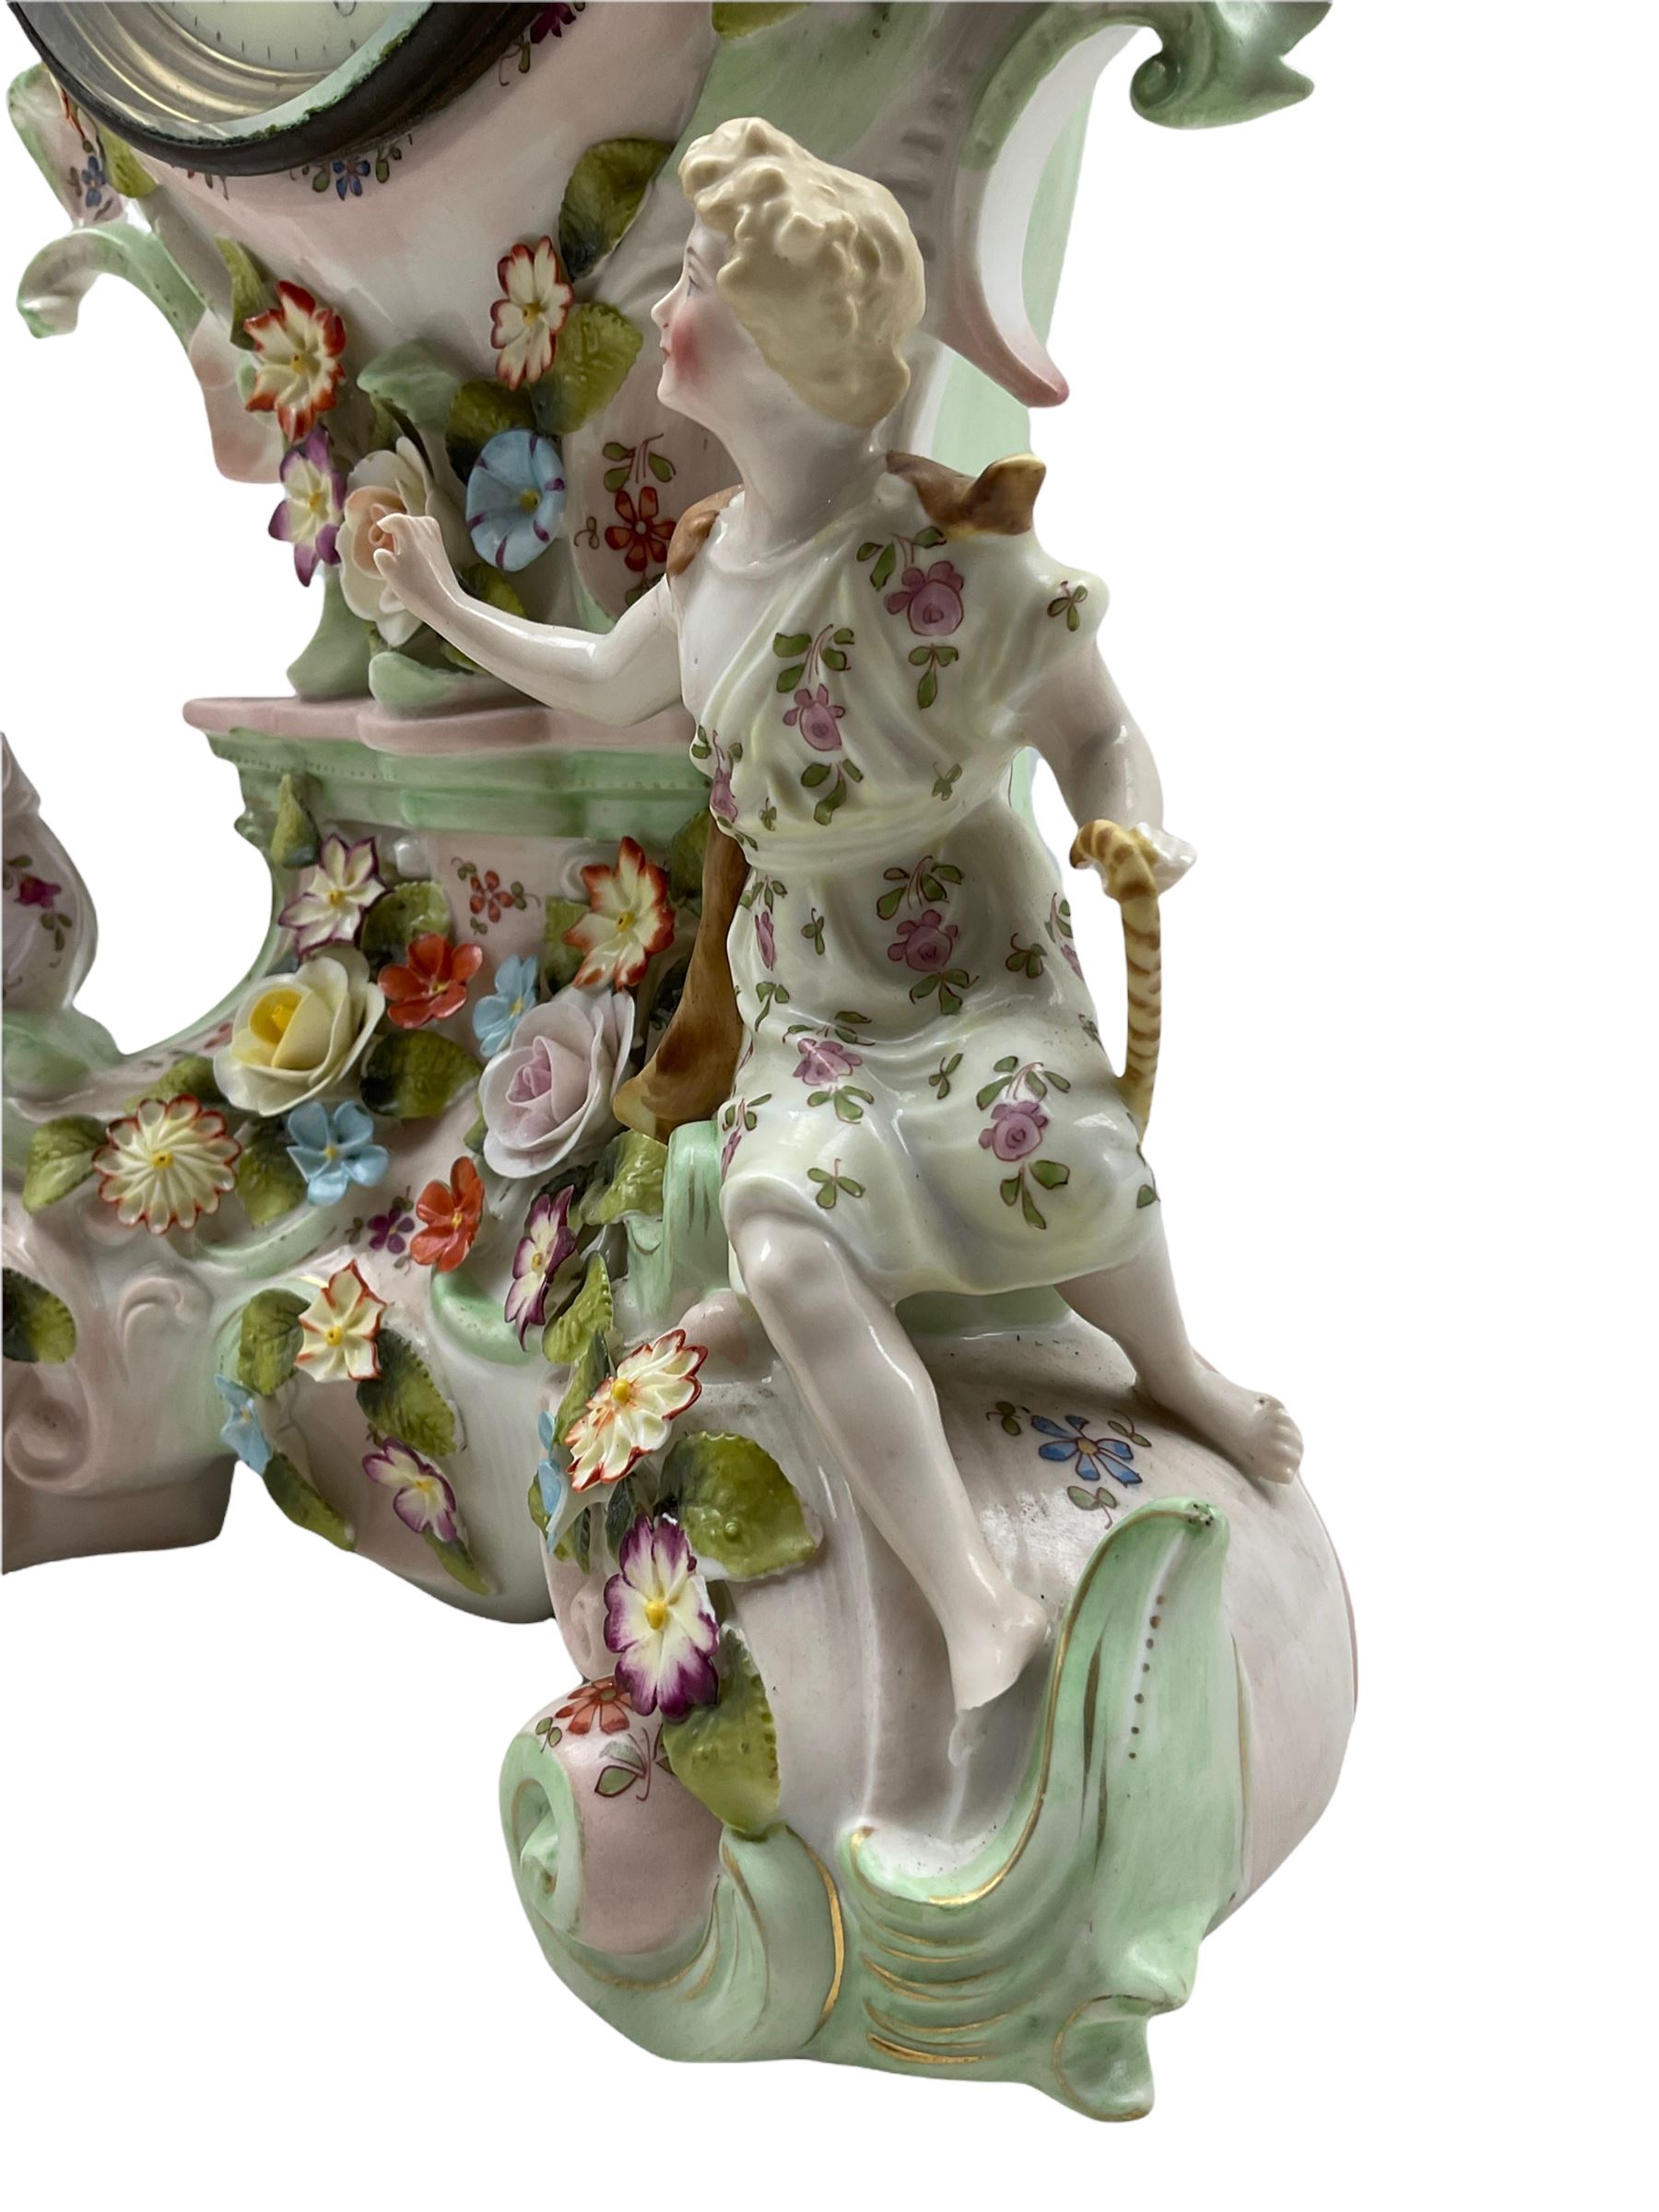 Mid-19th century continental porcelain mantle clock in the Meissen Rococo style decorated with encru - Image 3 of 3